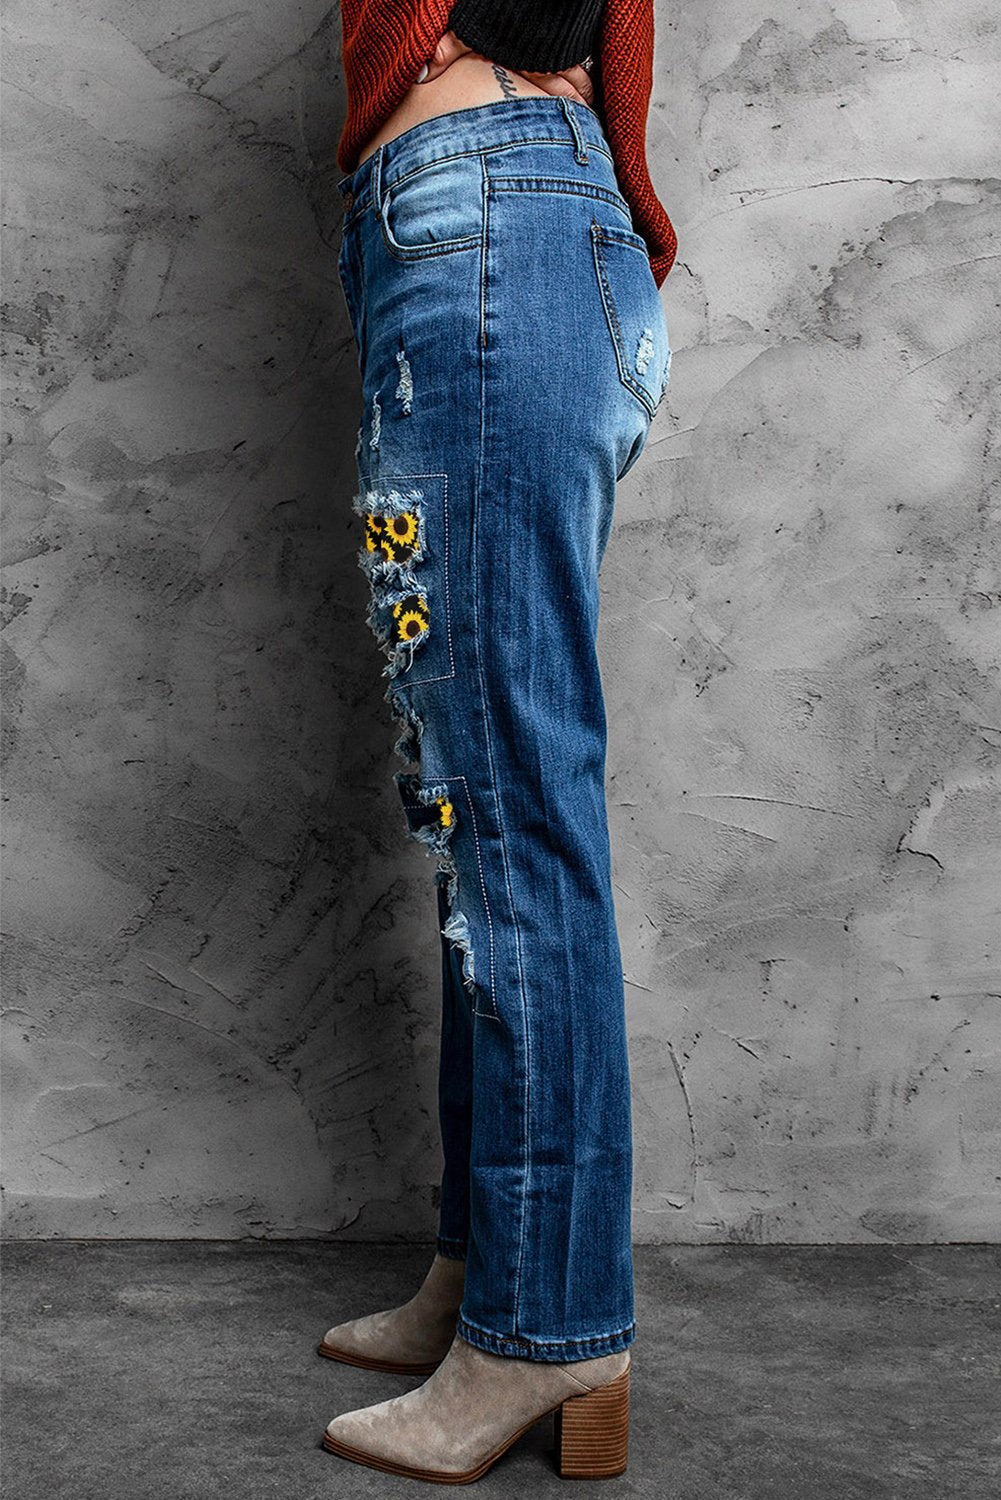 Sunflower Distressed Jeans